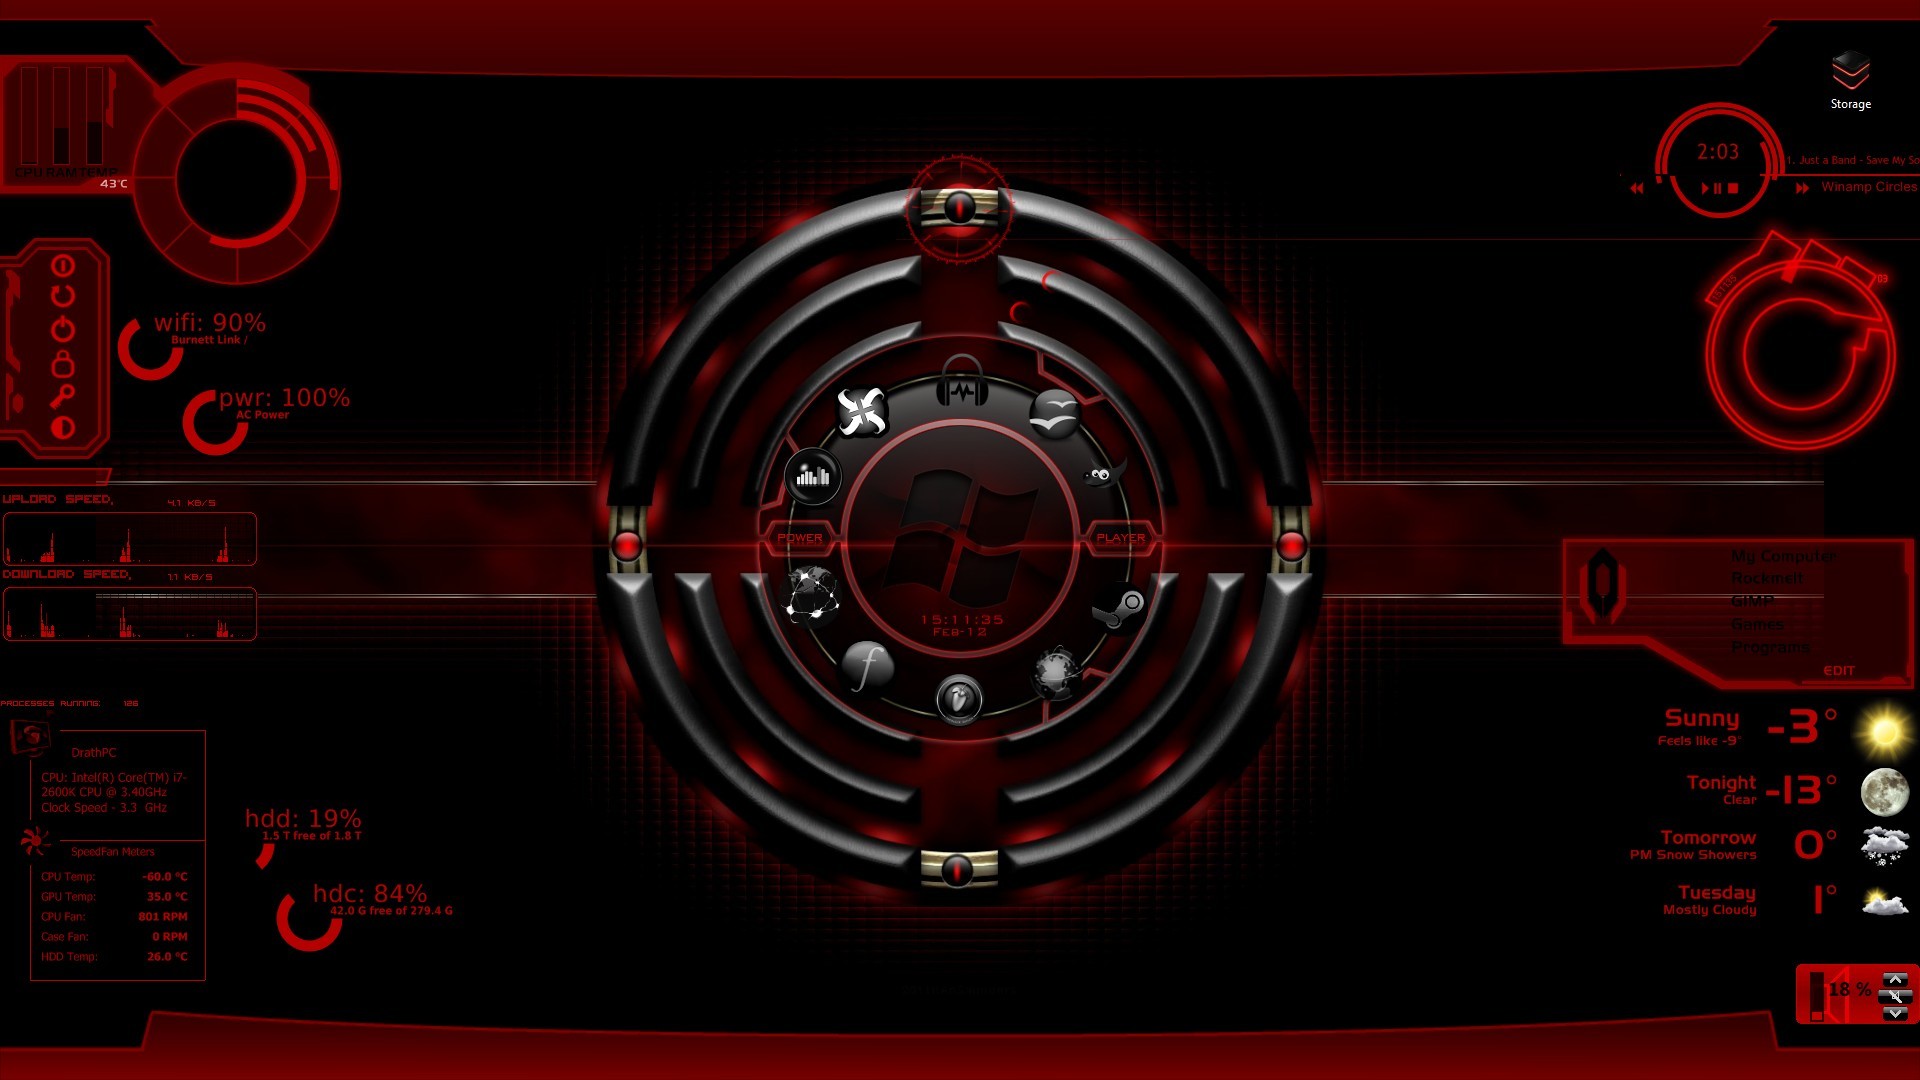 1920x1080 windows 7 wallpaper black and red